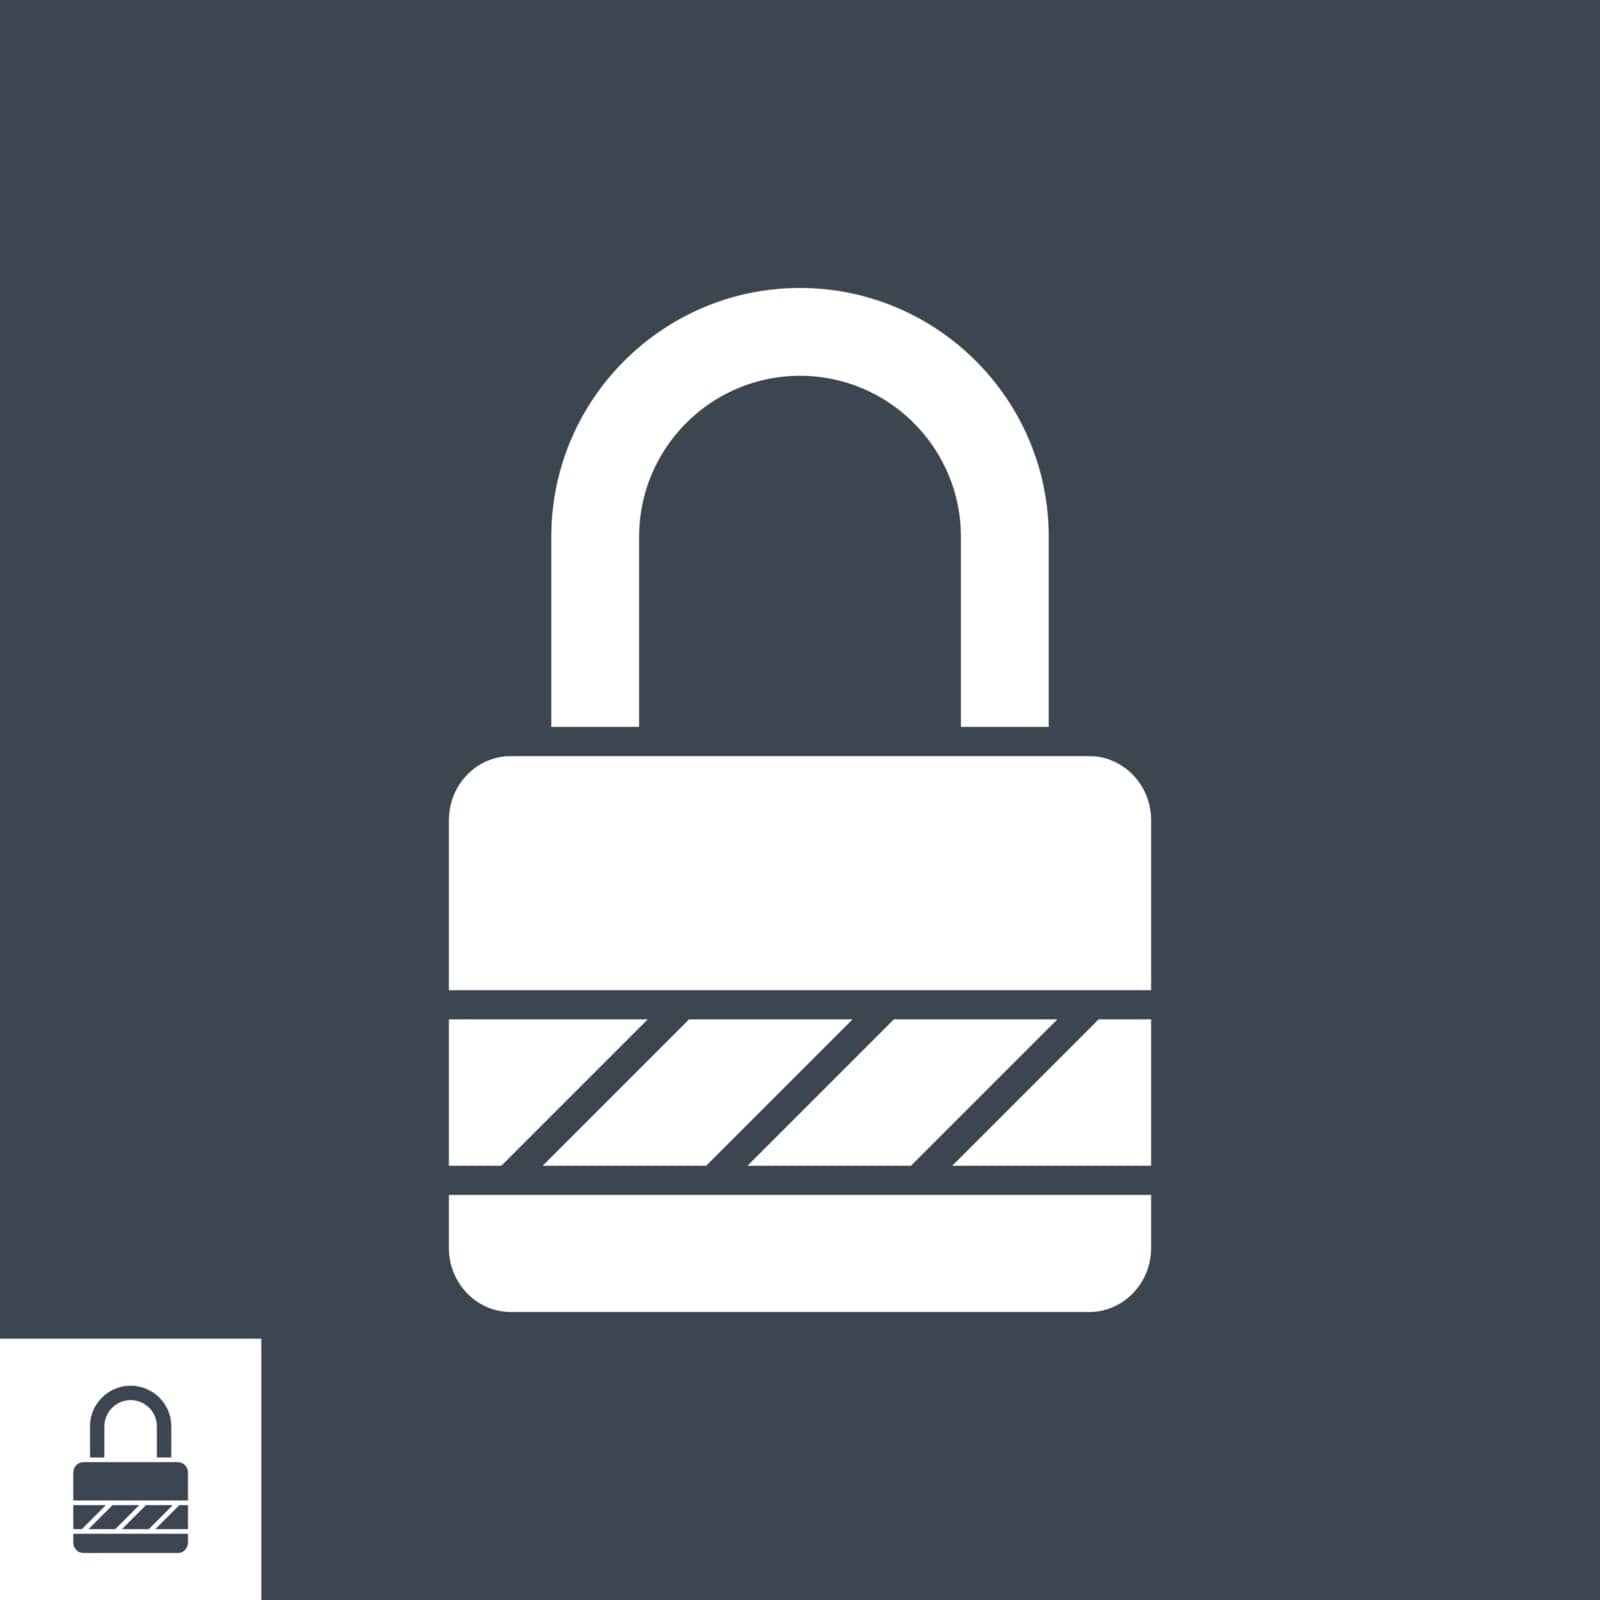 Padlock Related Vector Glyph Icon. Isolated on Black Background. Vector Illustration.